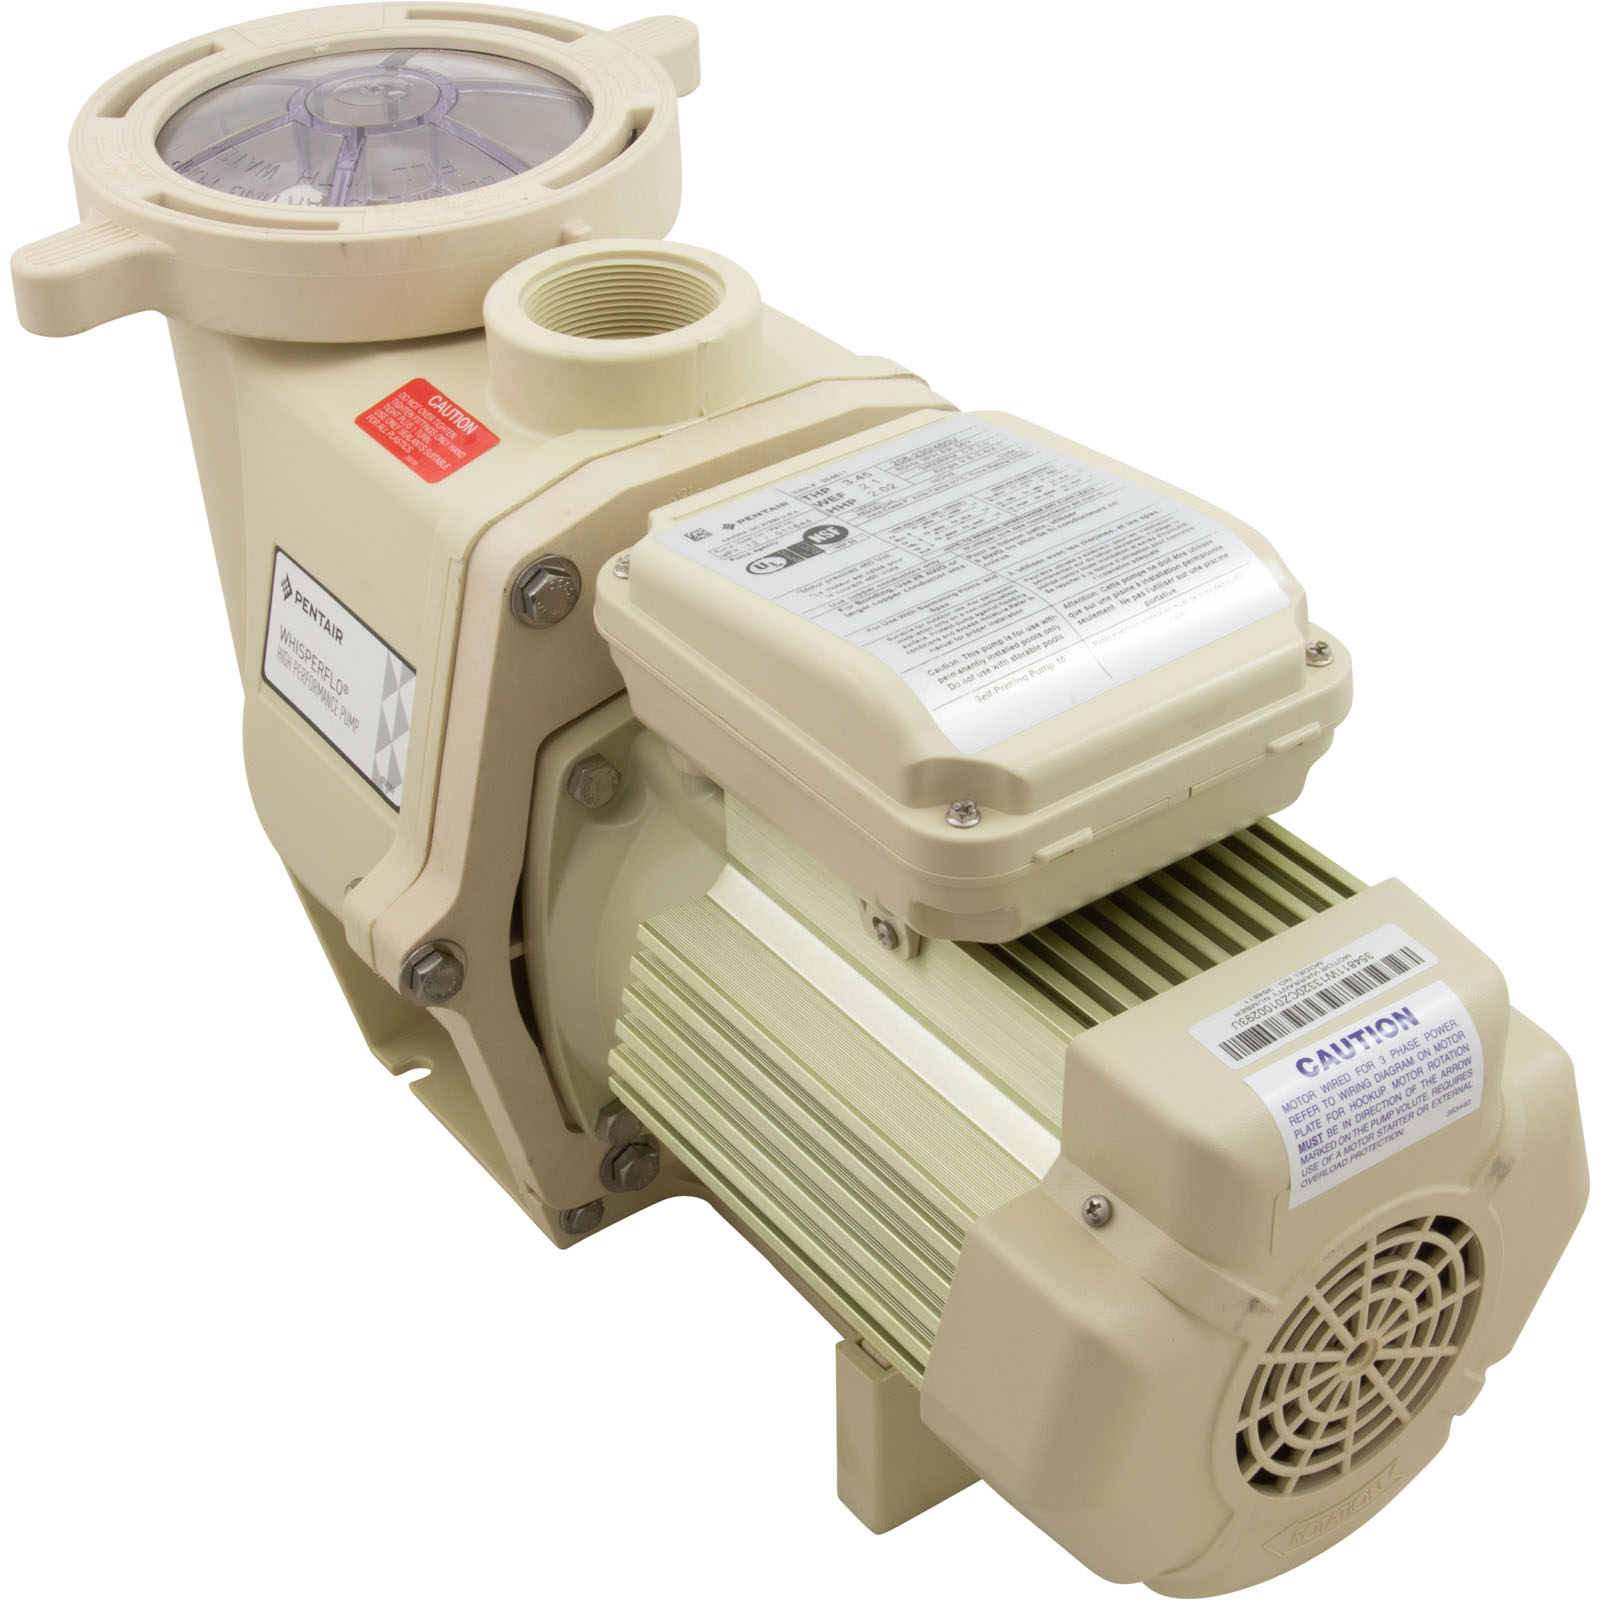 Picture of 011644 011644  Pentair WFK-12 3.0hp WhisperFlo  Pump   208-230 / 460  3-Phase Super Duty motor and pump